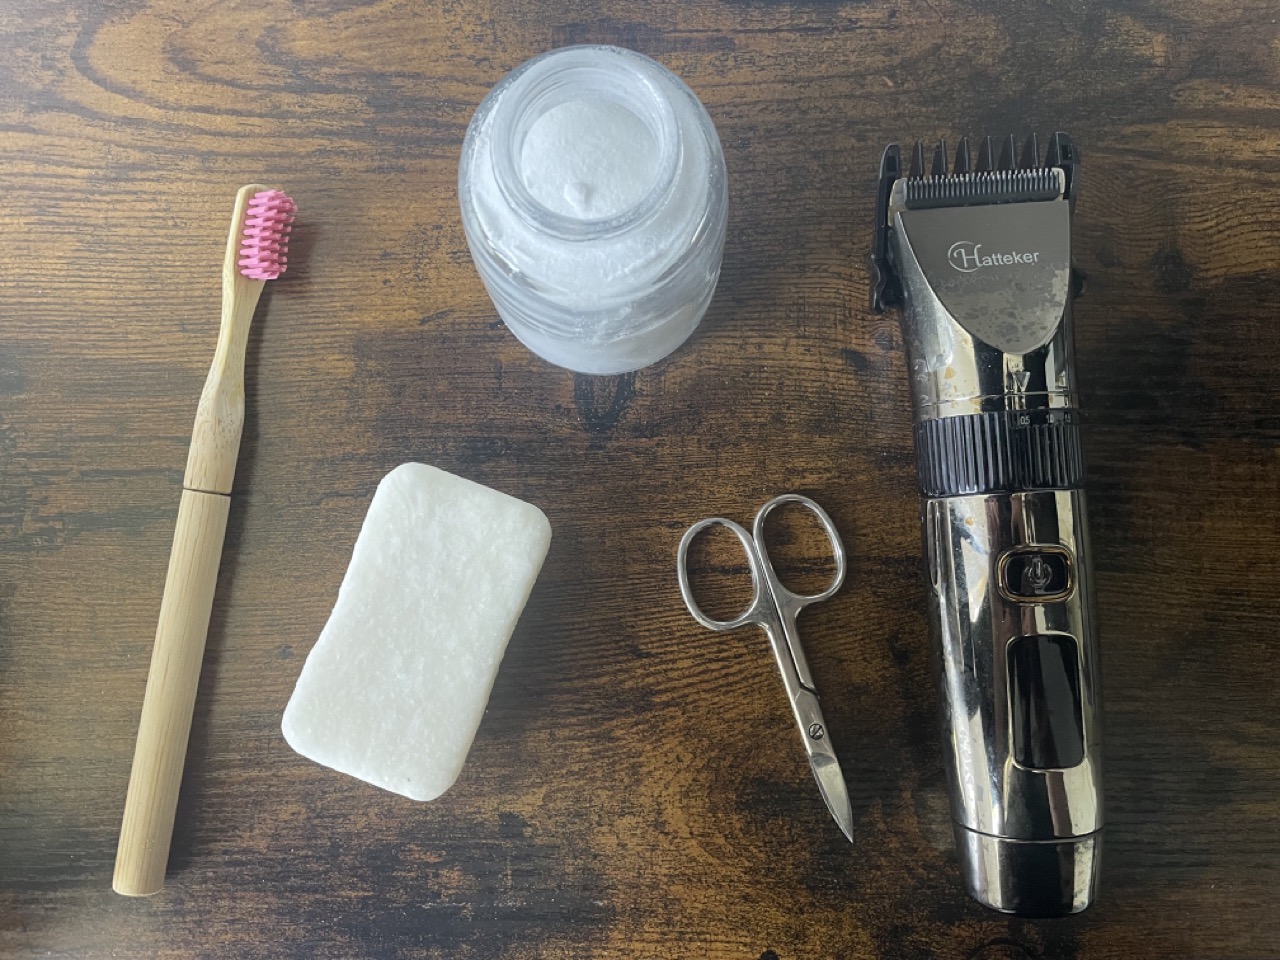 Personal care products of an extreme minimalist